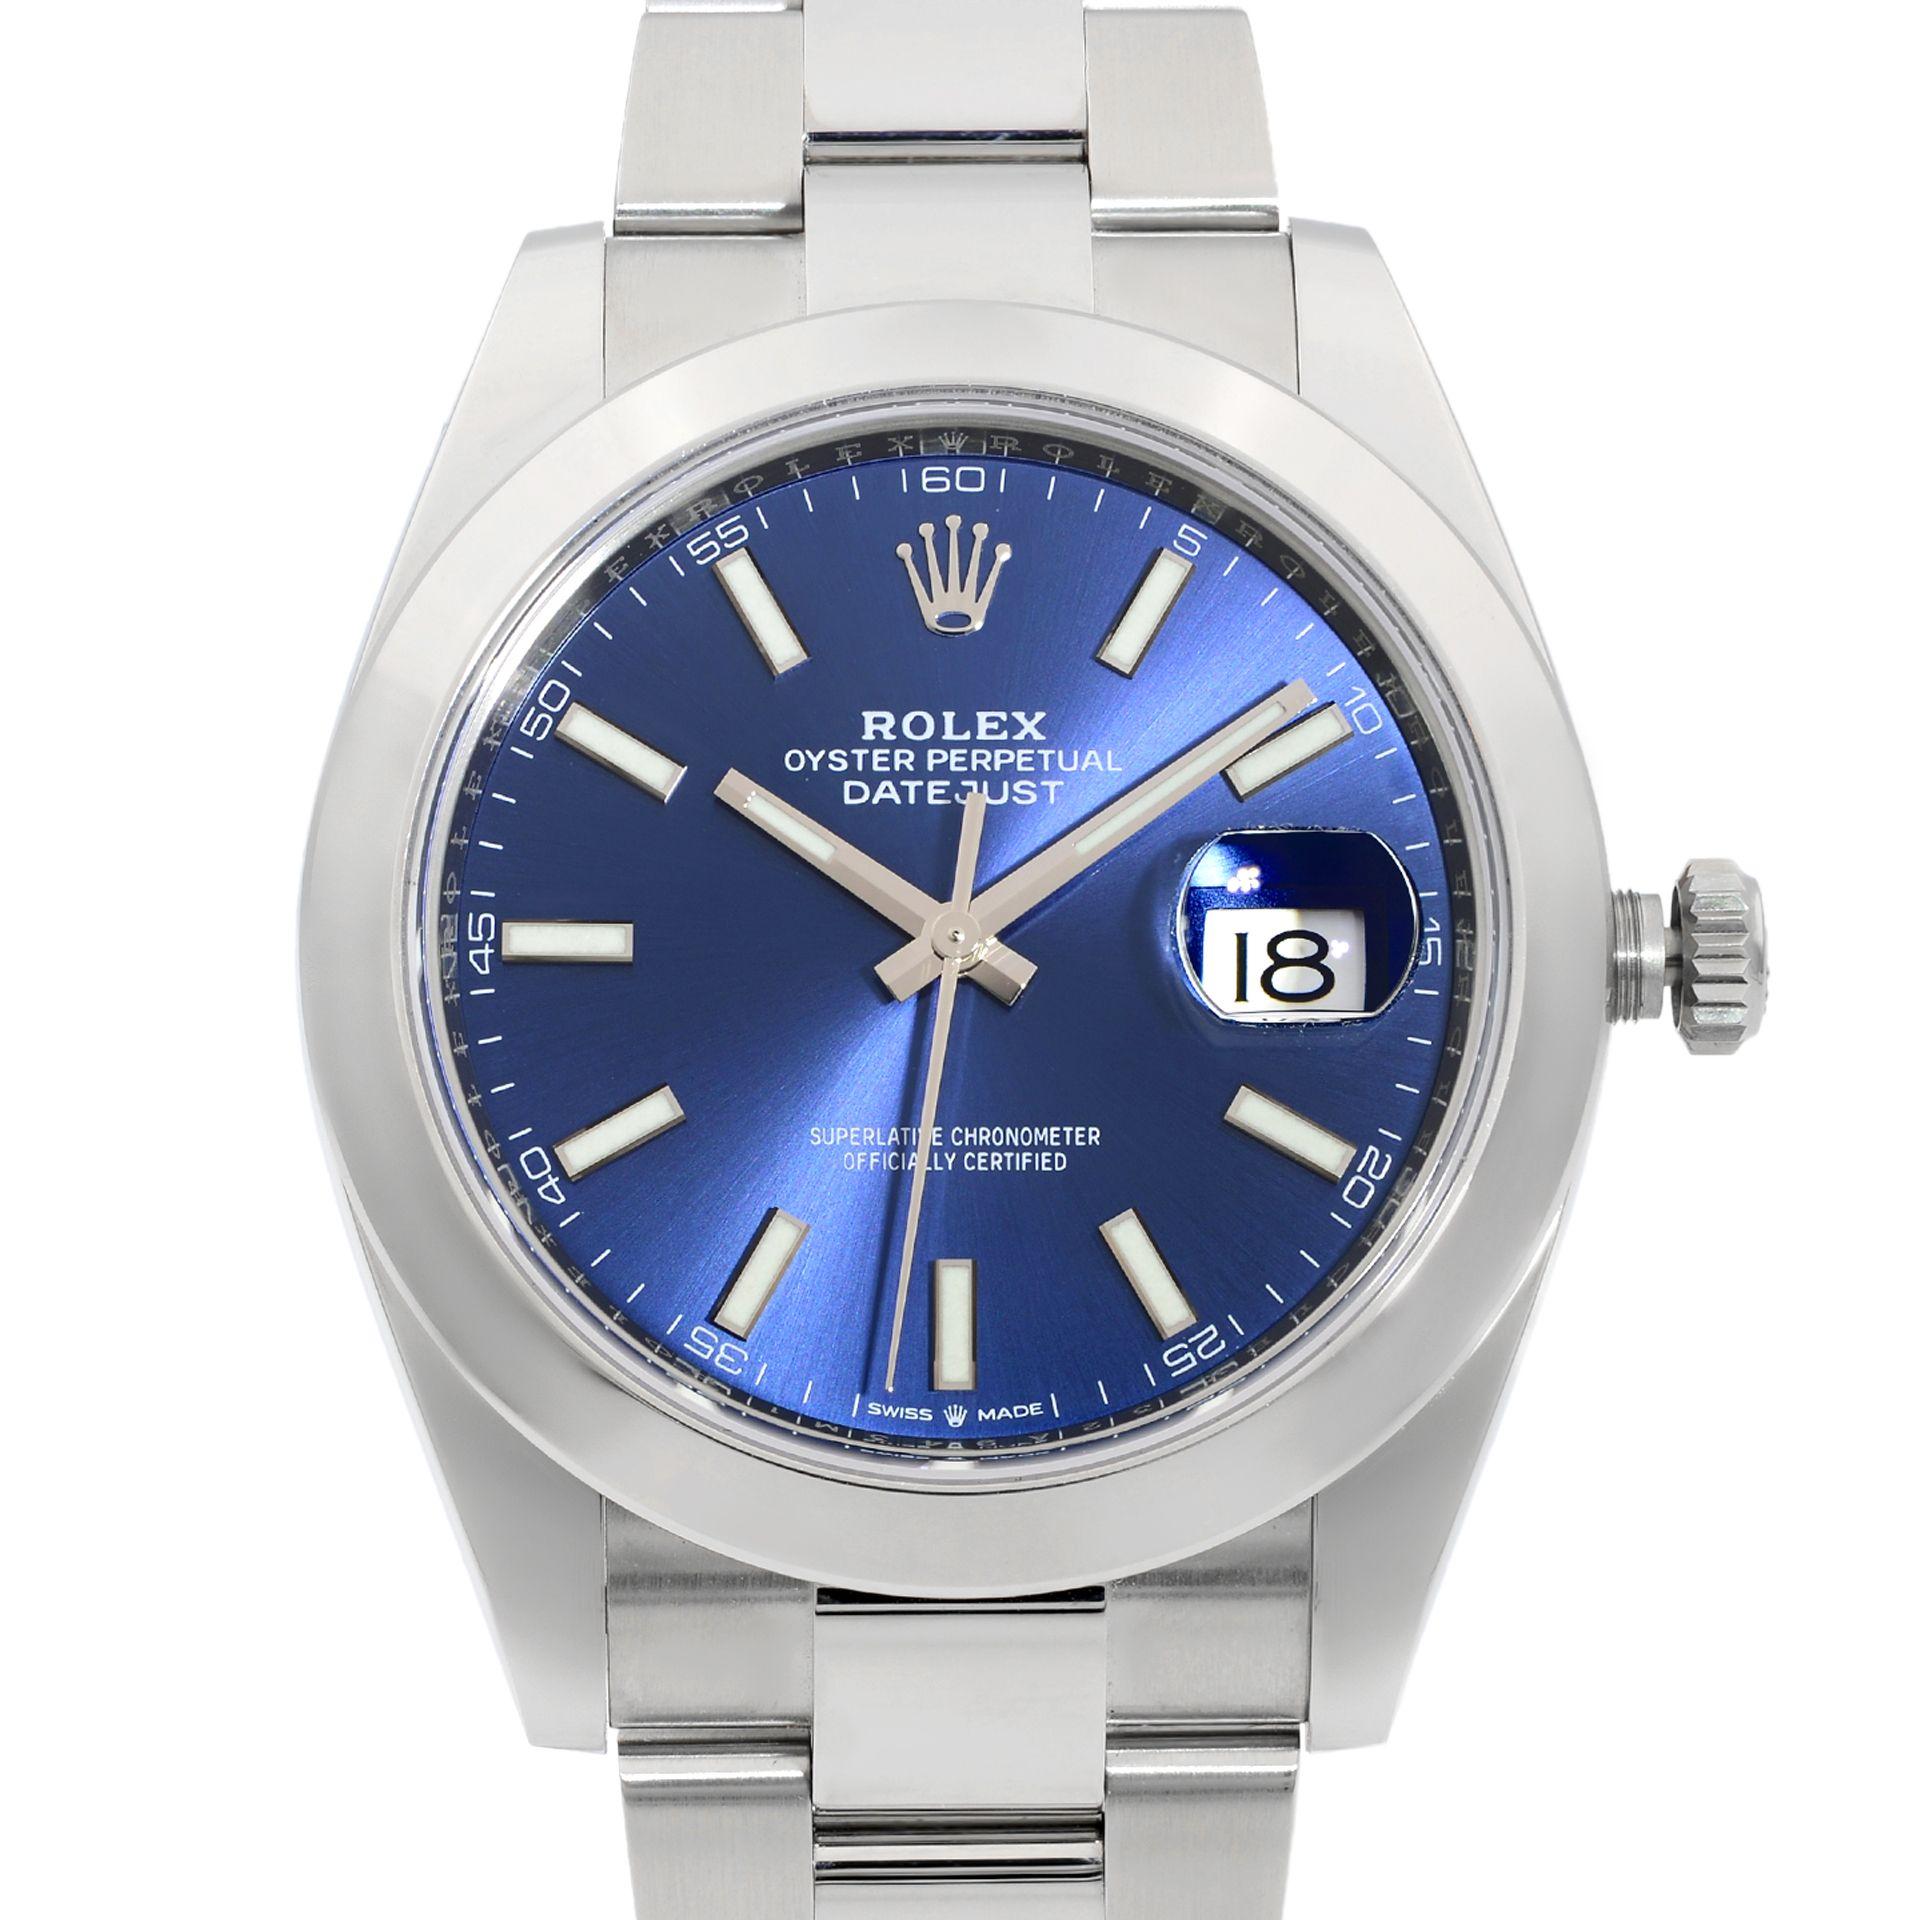 This New Without Tags Rolex Datejust 41 126300 is a beautiful men's timepiece that is powered by a mechanical (automatic) movement which is cased in a stainless steel case. It has a round shape face, date indicator dial, and has hand sticks style